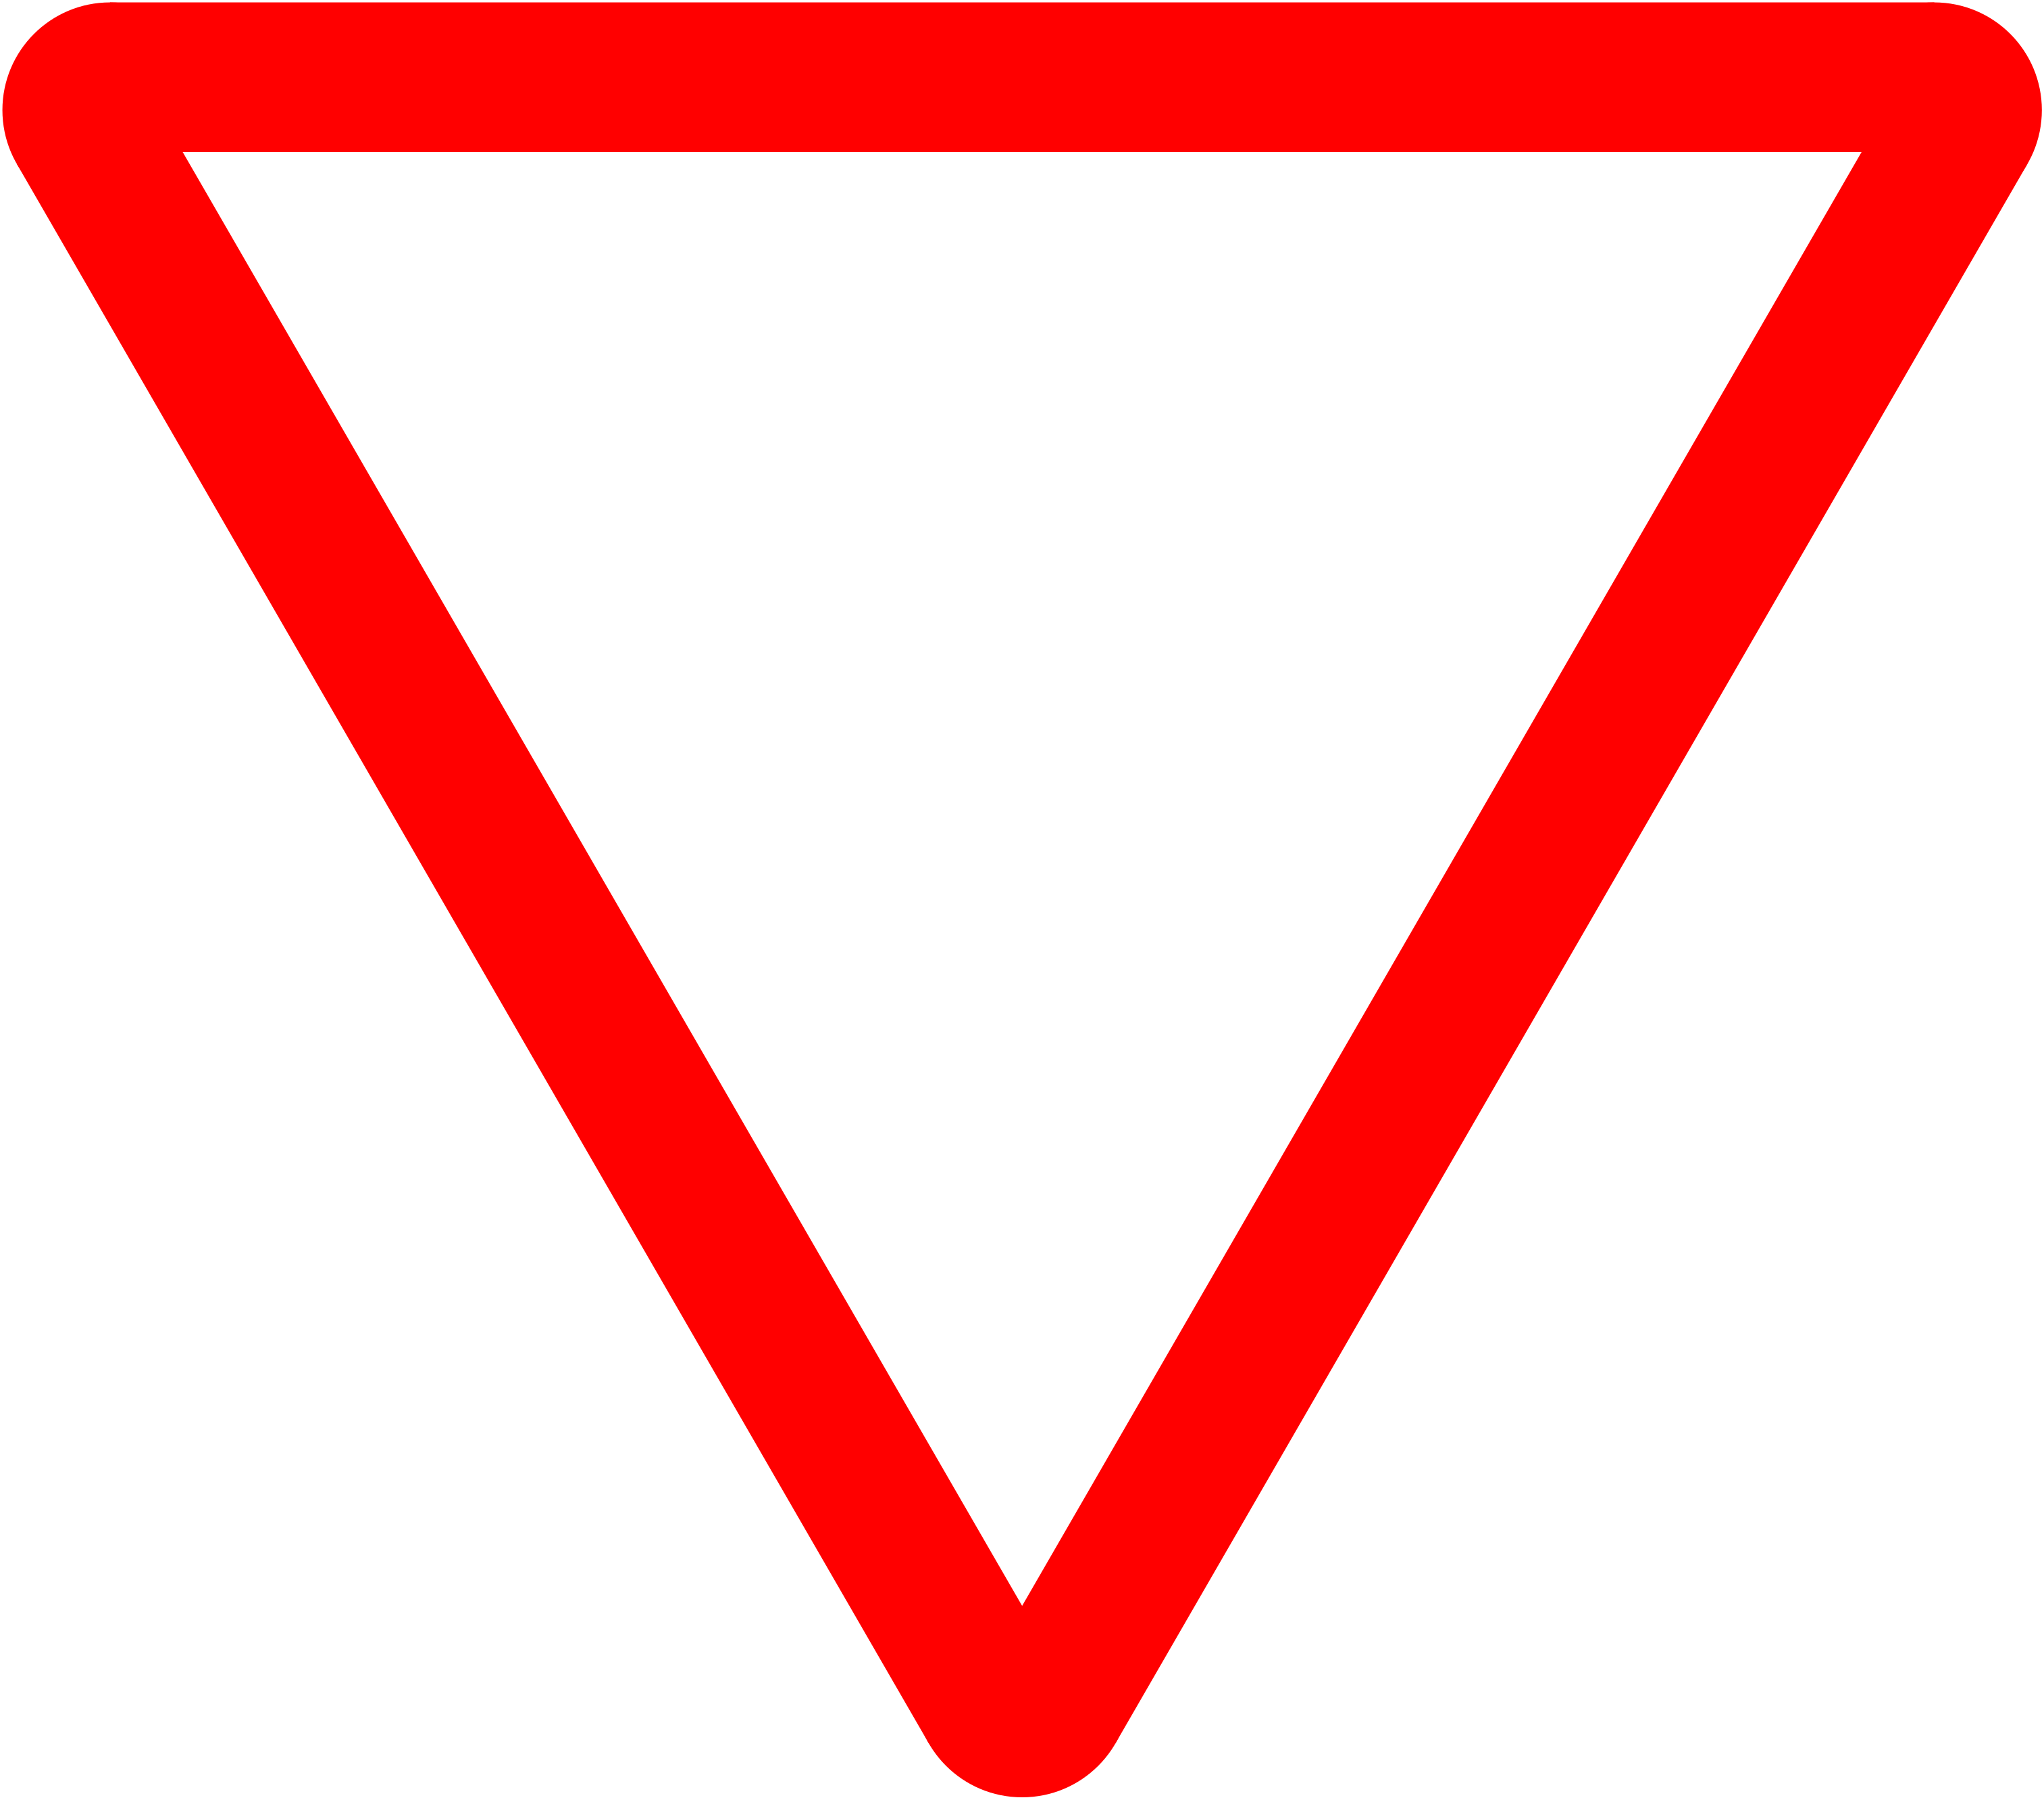 File:IE road sign W-041.svg - Wikipedia